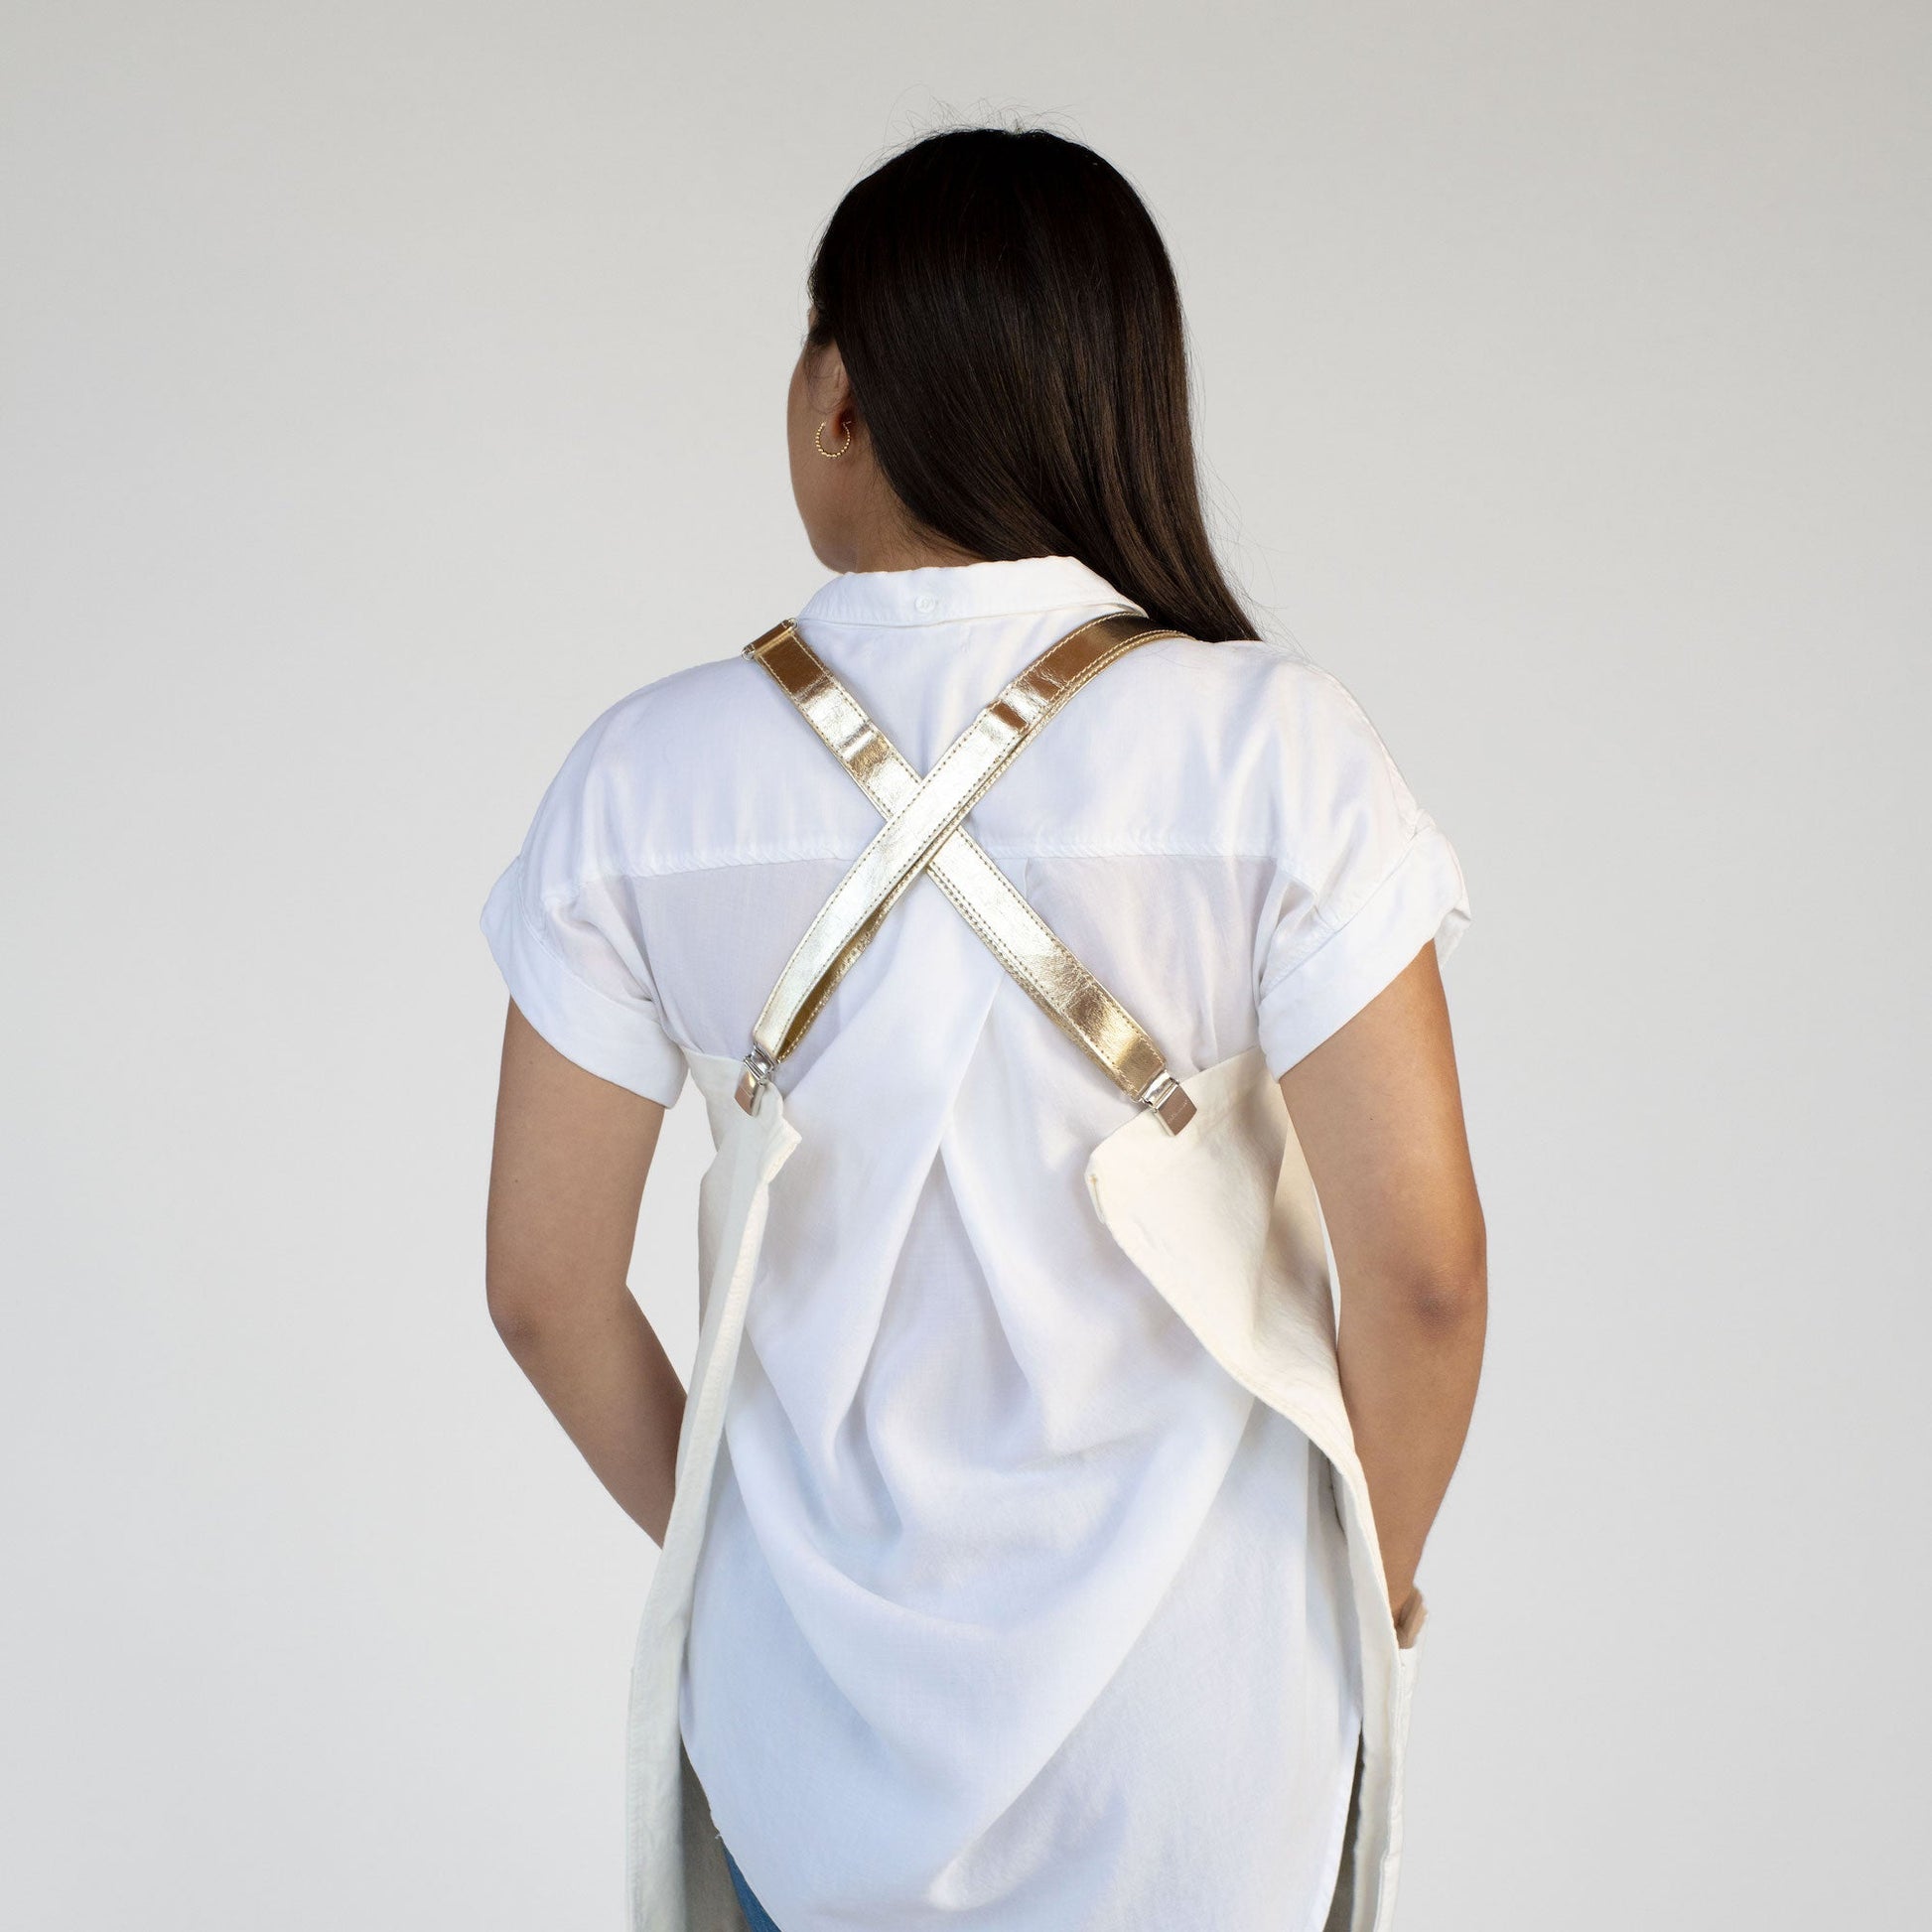 A woman is shown from the back wearing a white shirt and a washable paper apron. The apron is cream in colour, with gold metallic washable paper straps. 